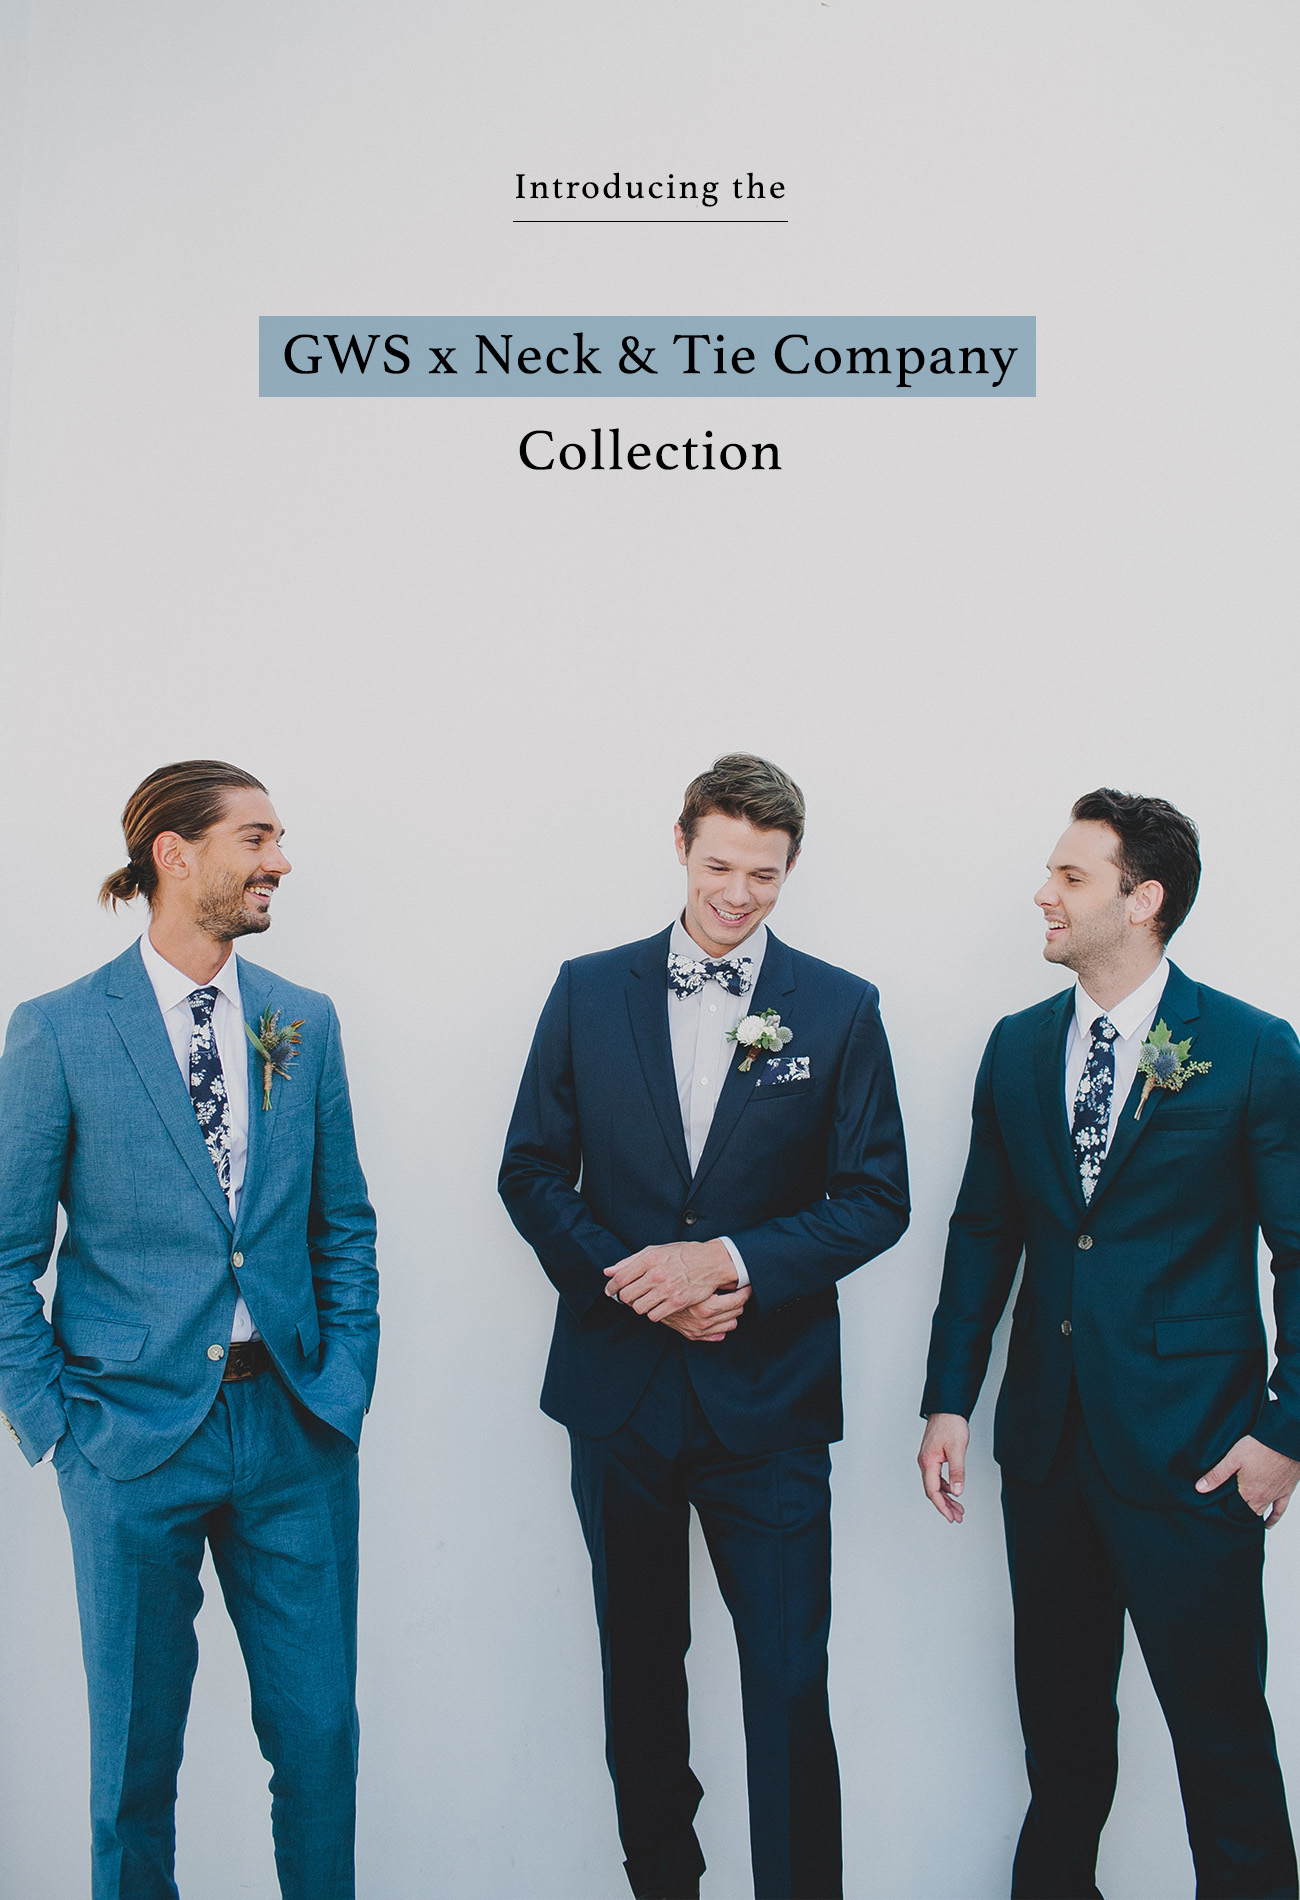 Introducing The GWS x Neck & Tie Company Tie Collection!